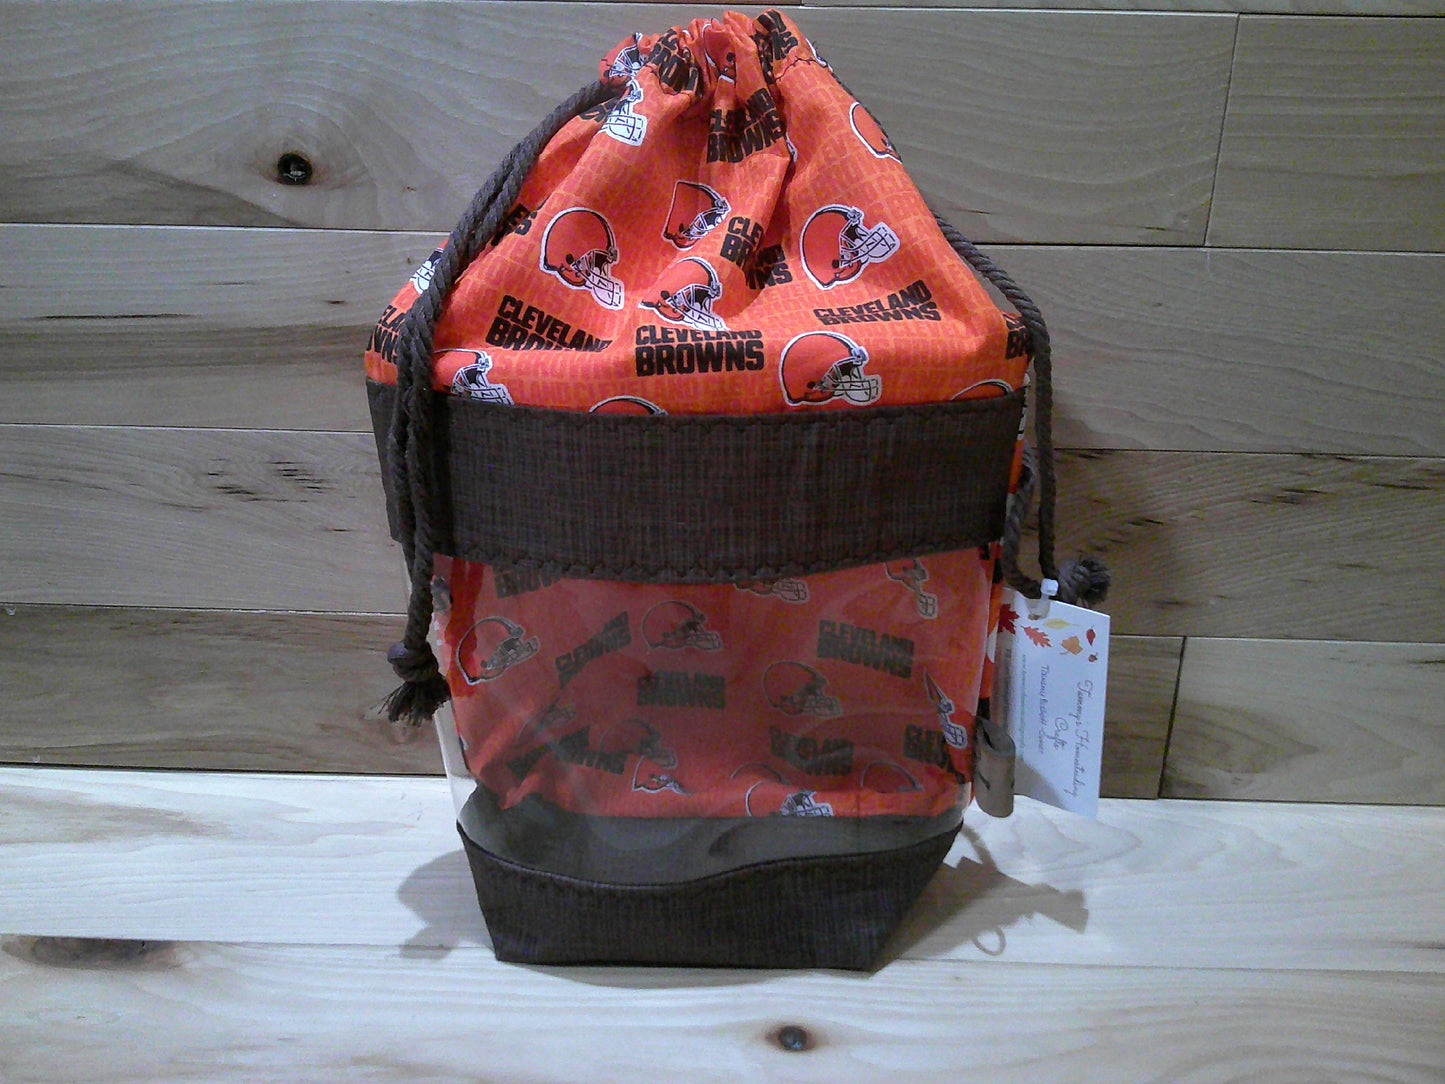 Cleveland Browns ~ project bags